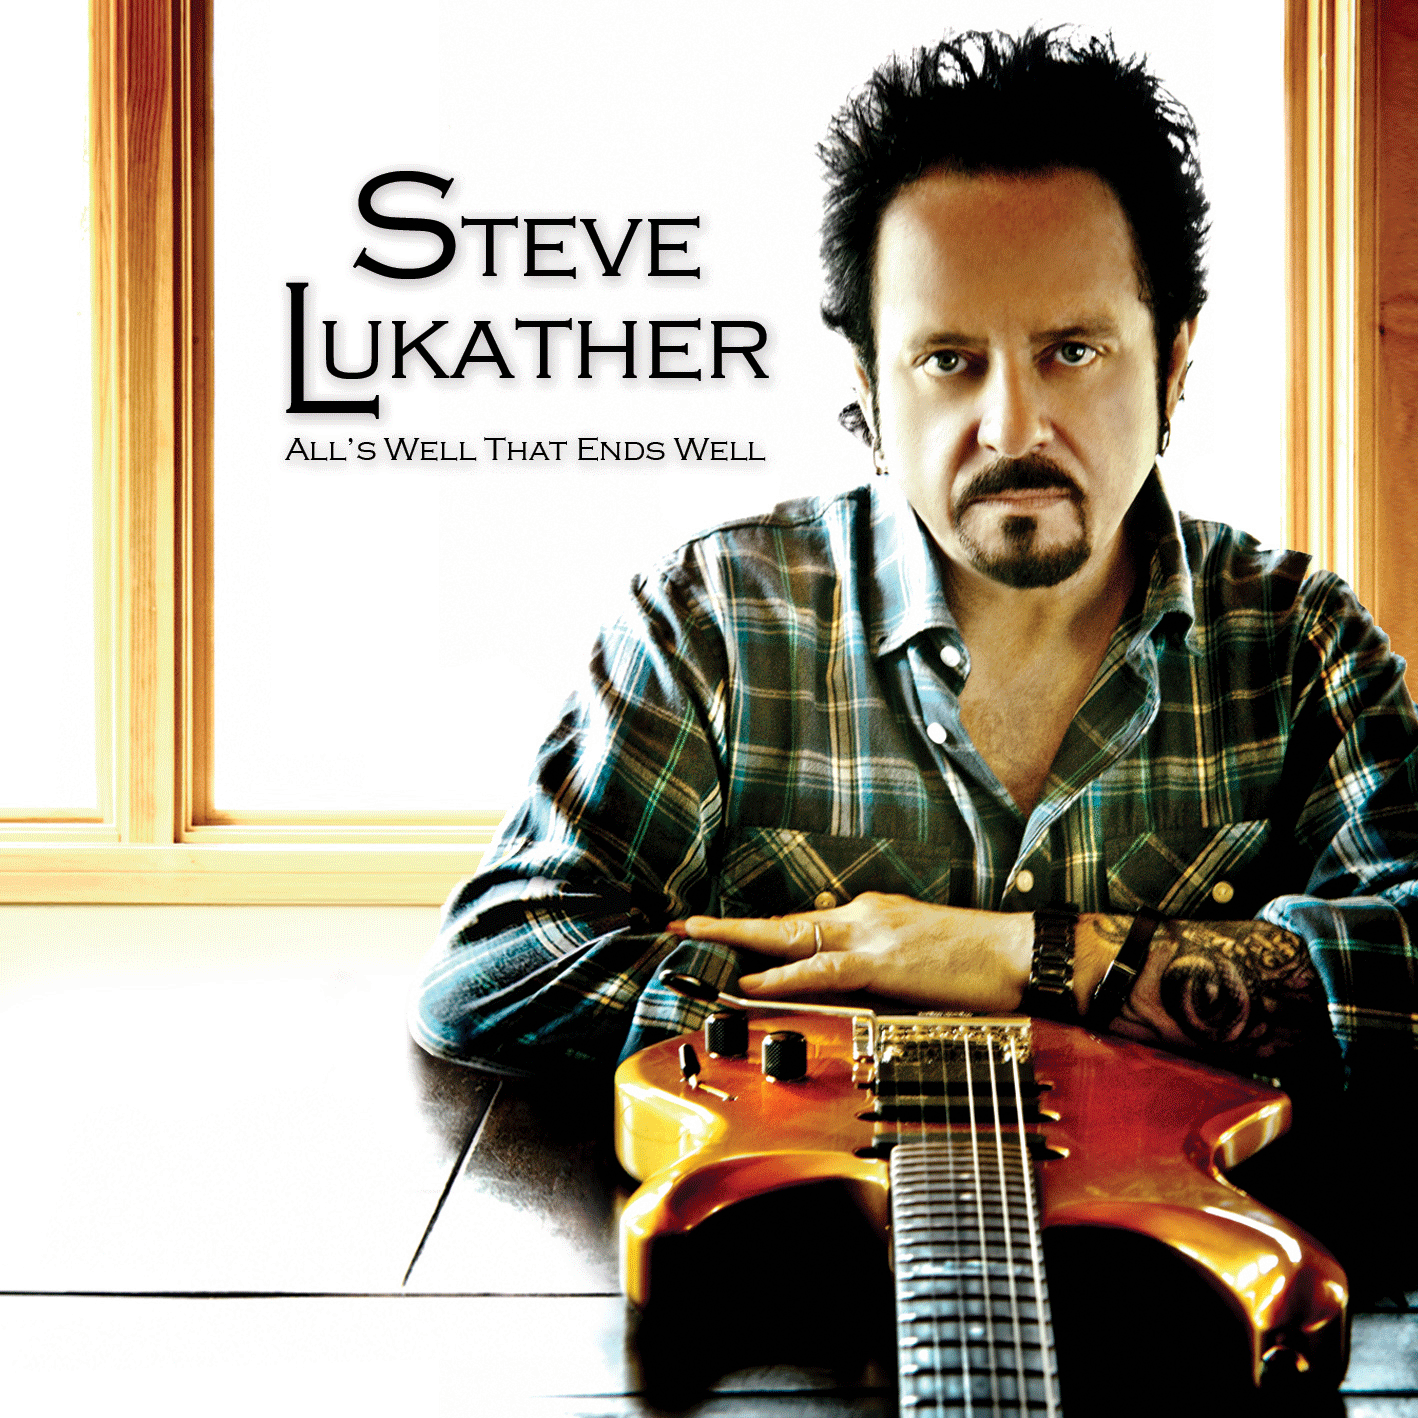 [Review] nouvel album de Steve Lukather – All’s Well That Ends Well